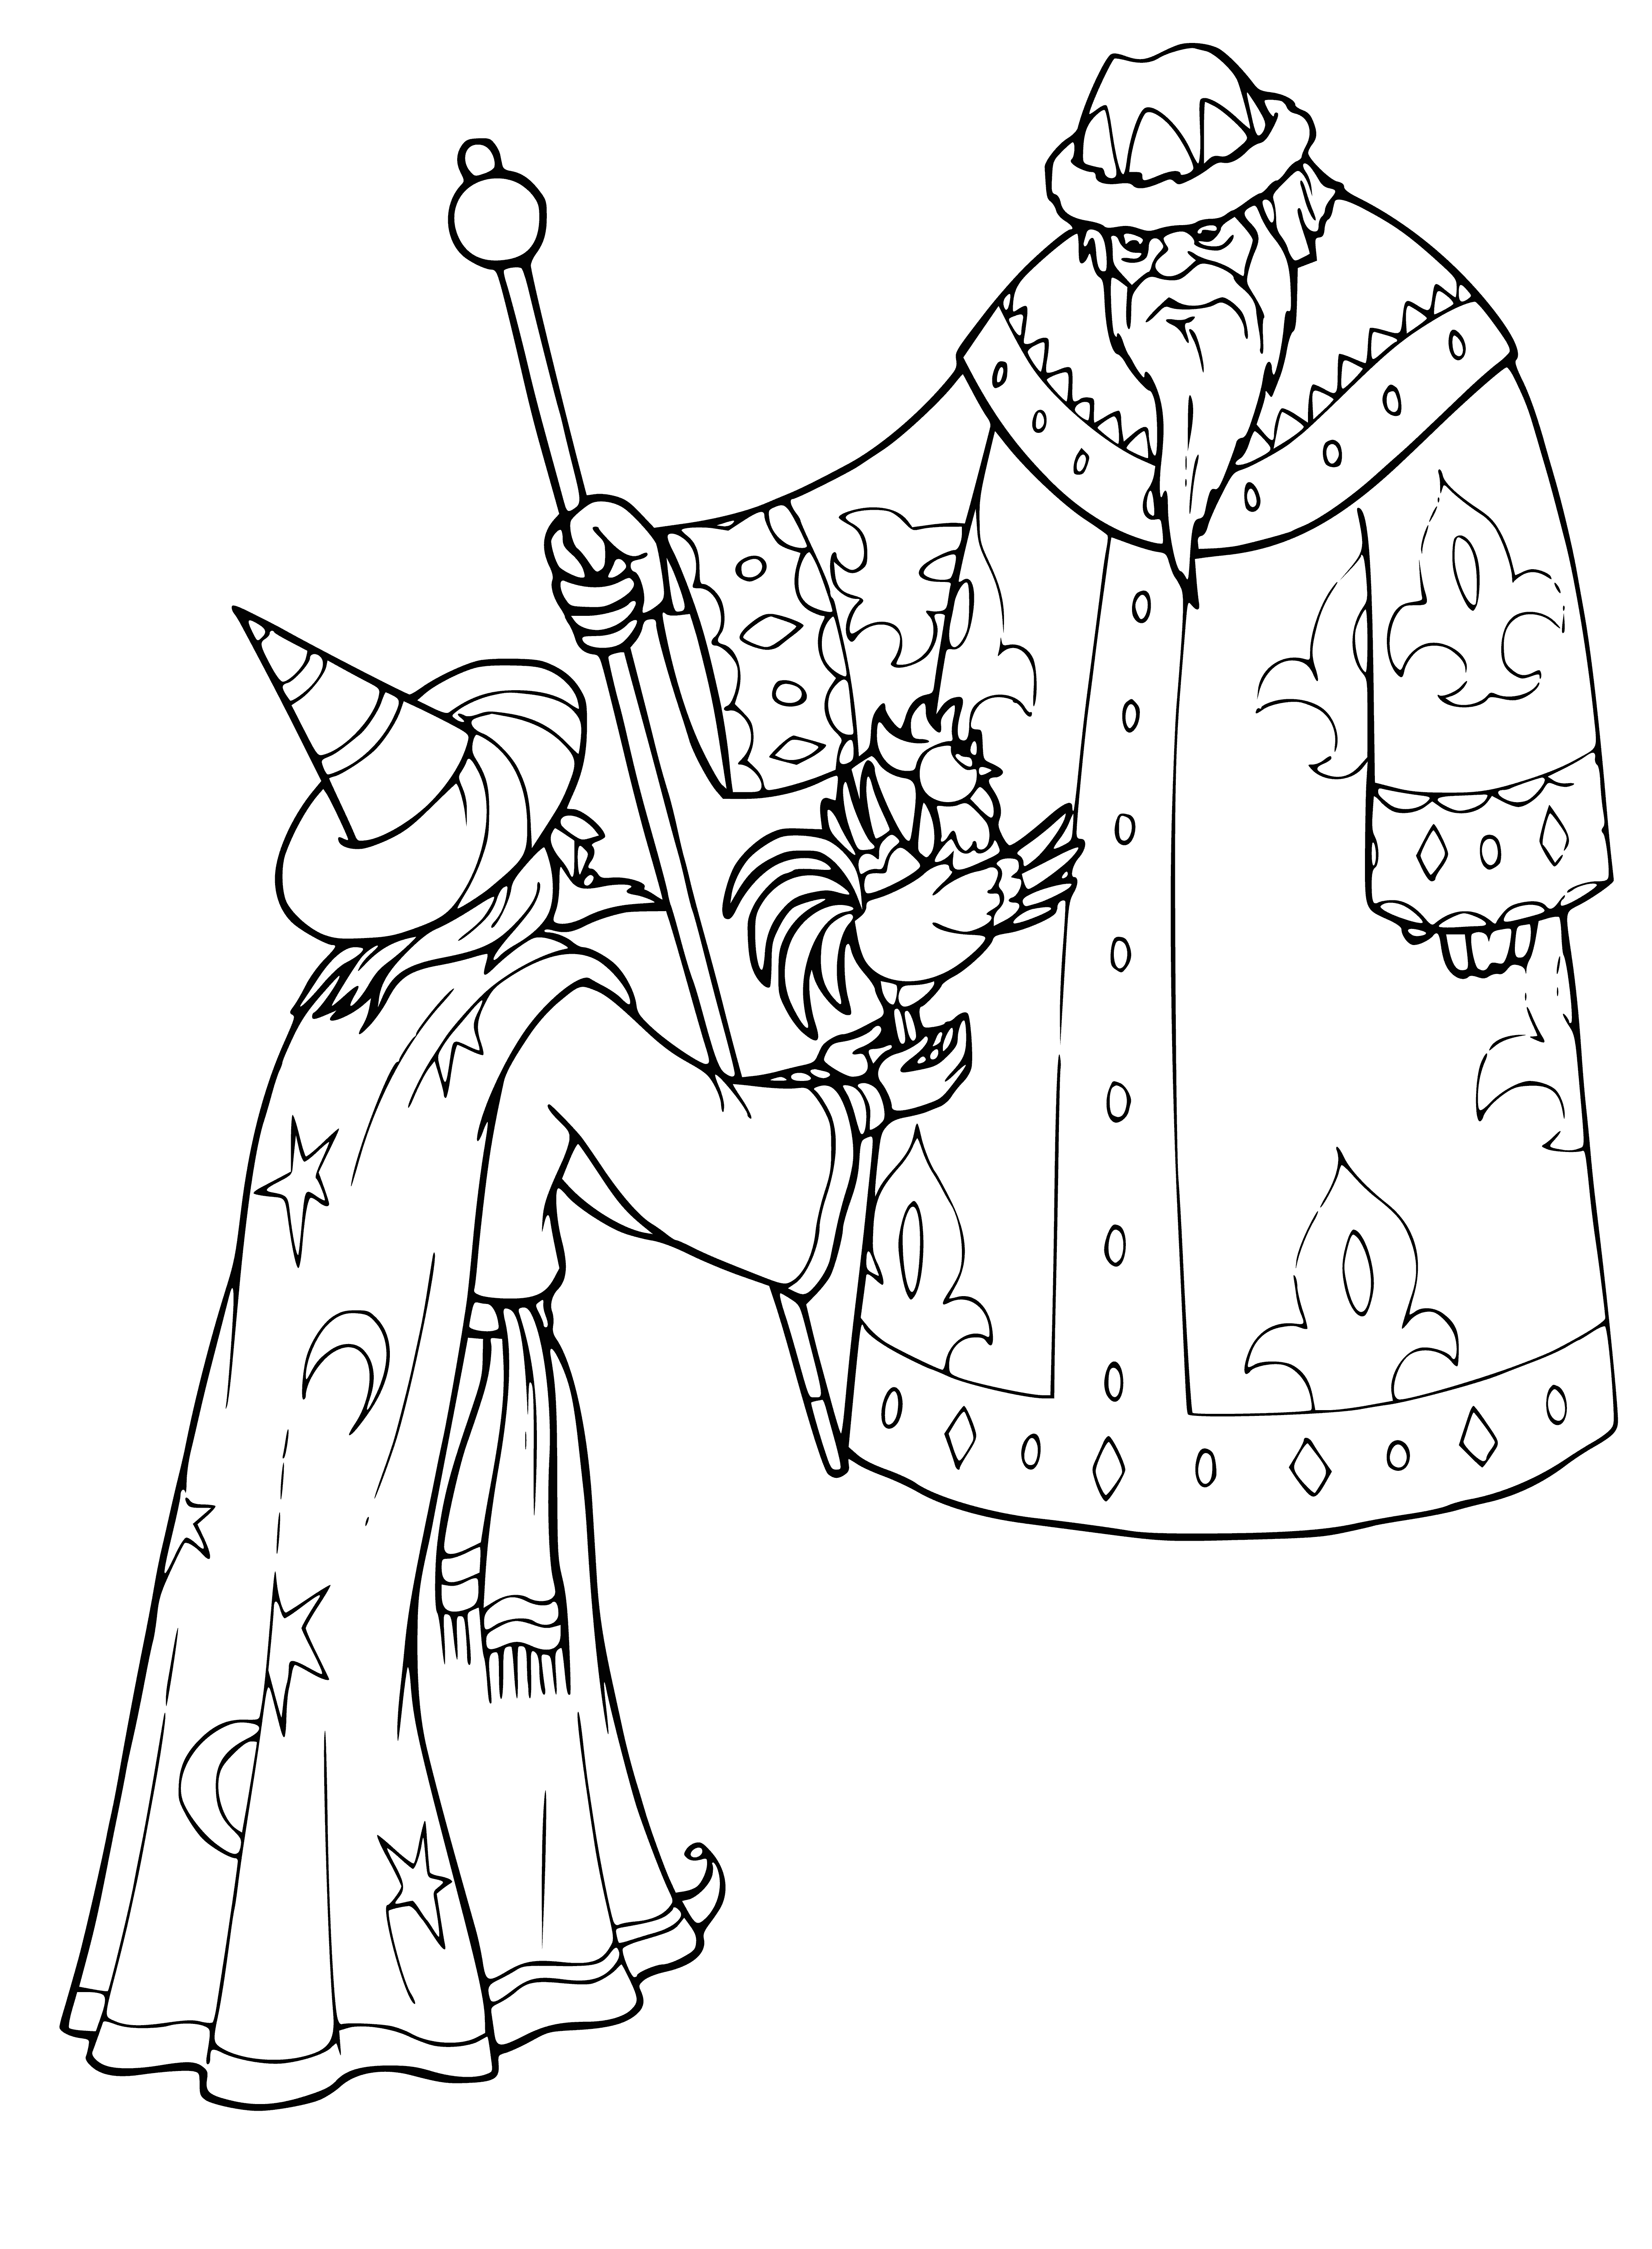 Stargazer at the king coloring page